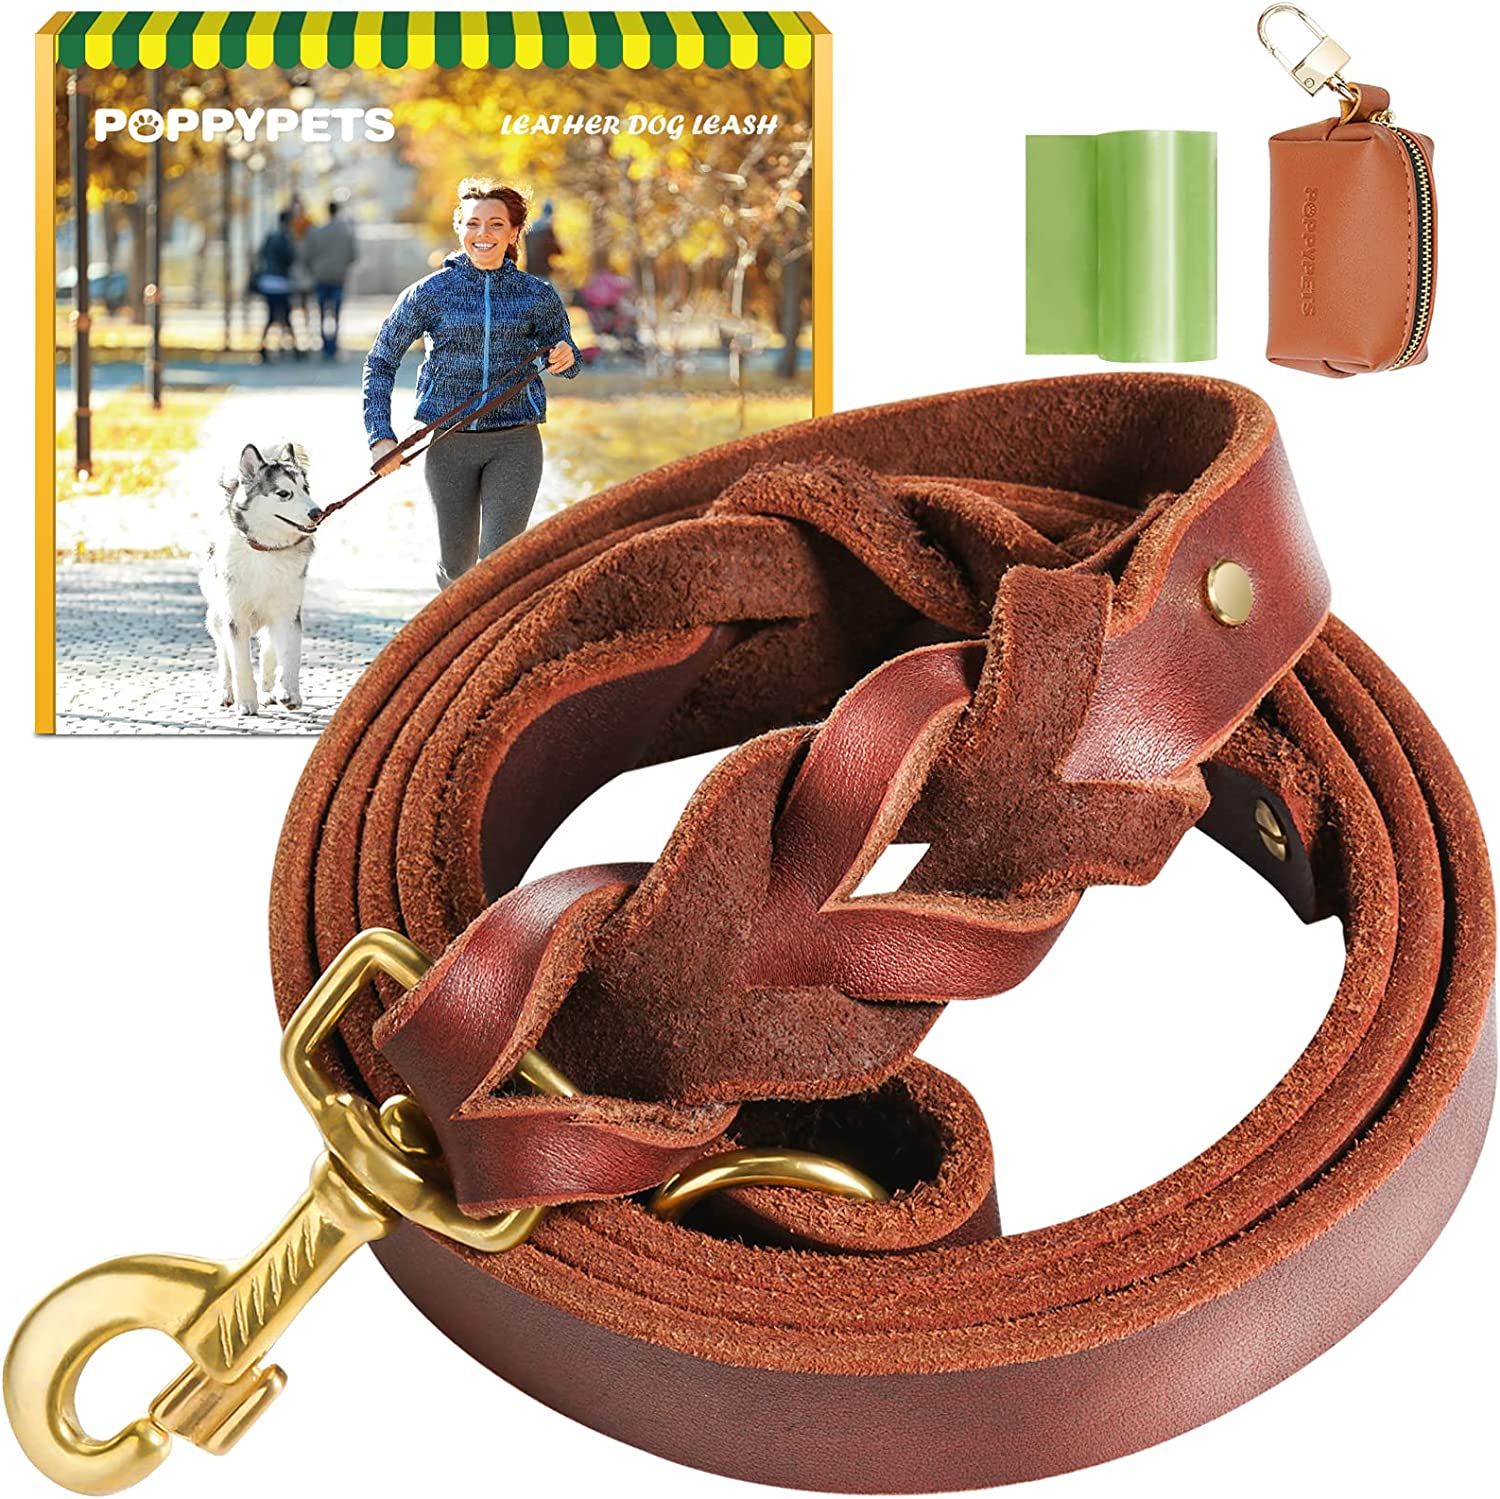 POPPYPETS 6' Long Leather Dog Leash with Waste Bag Dispenser from $8.22 + Free Shipping with Prime or $25+